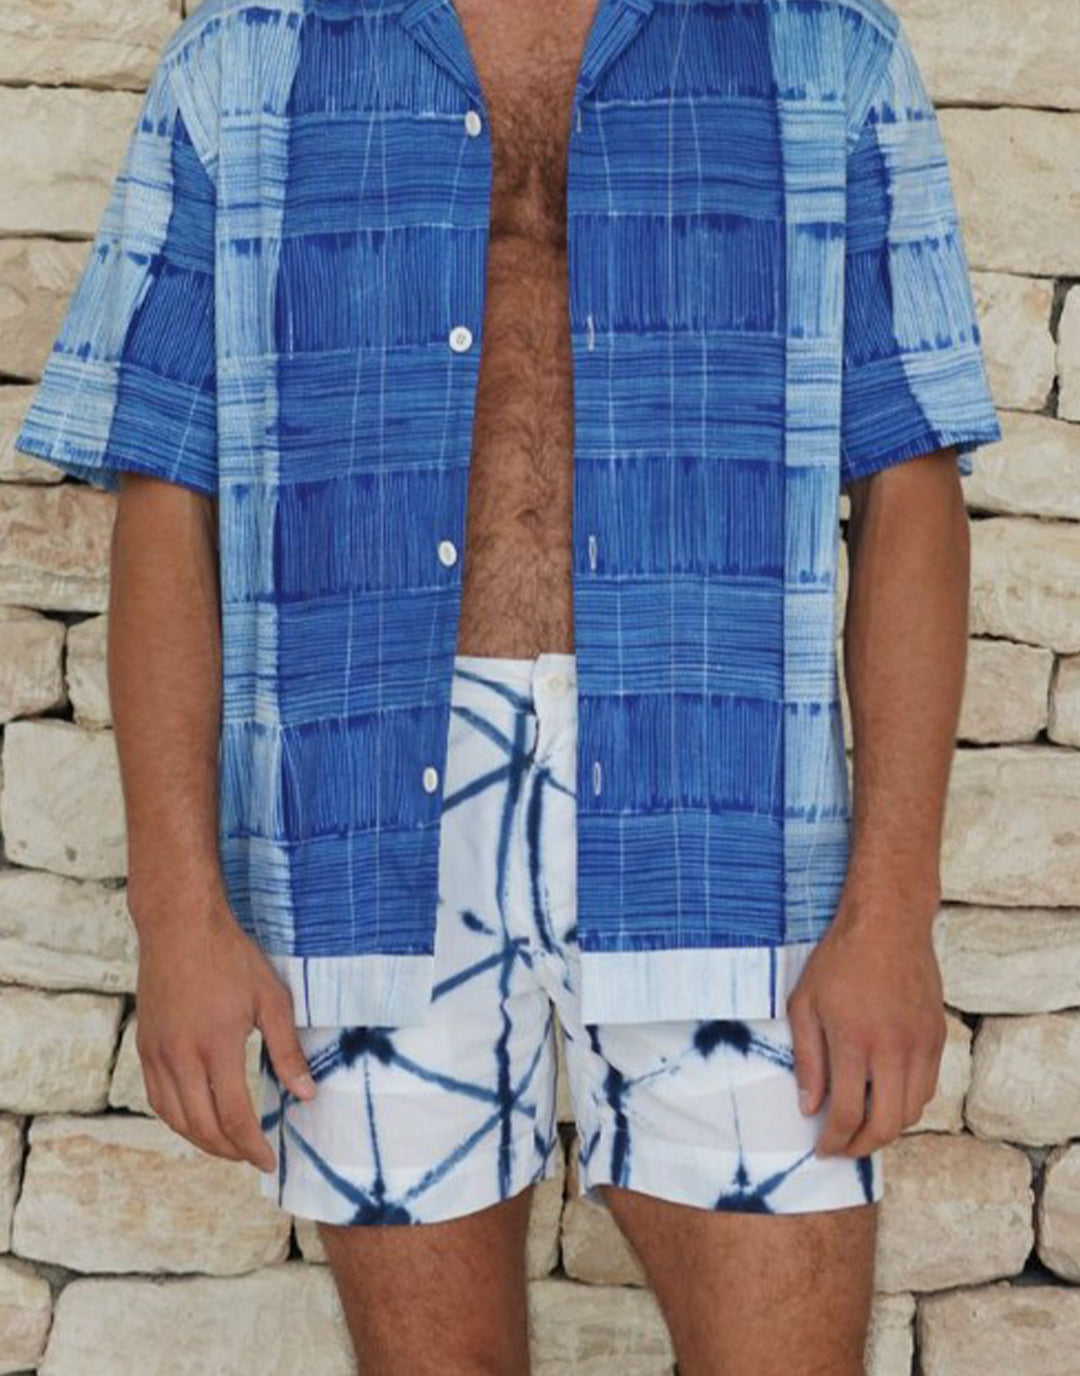 Pines Shorts in Sapphire and White Tie-Dye